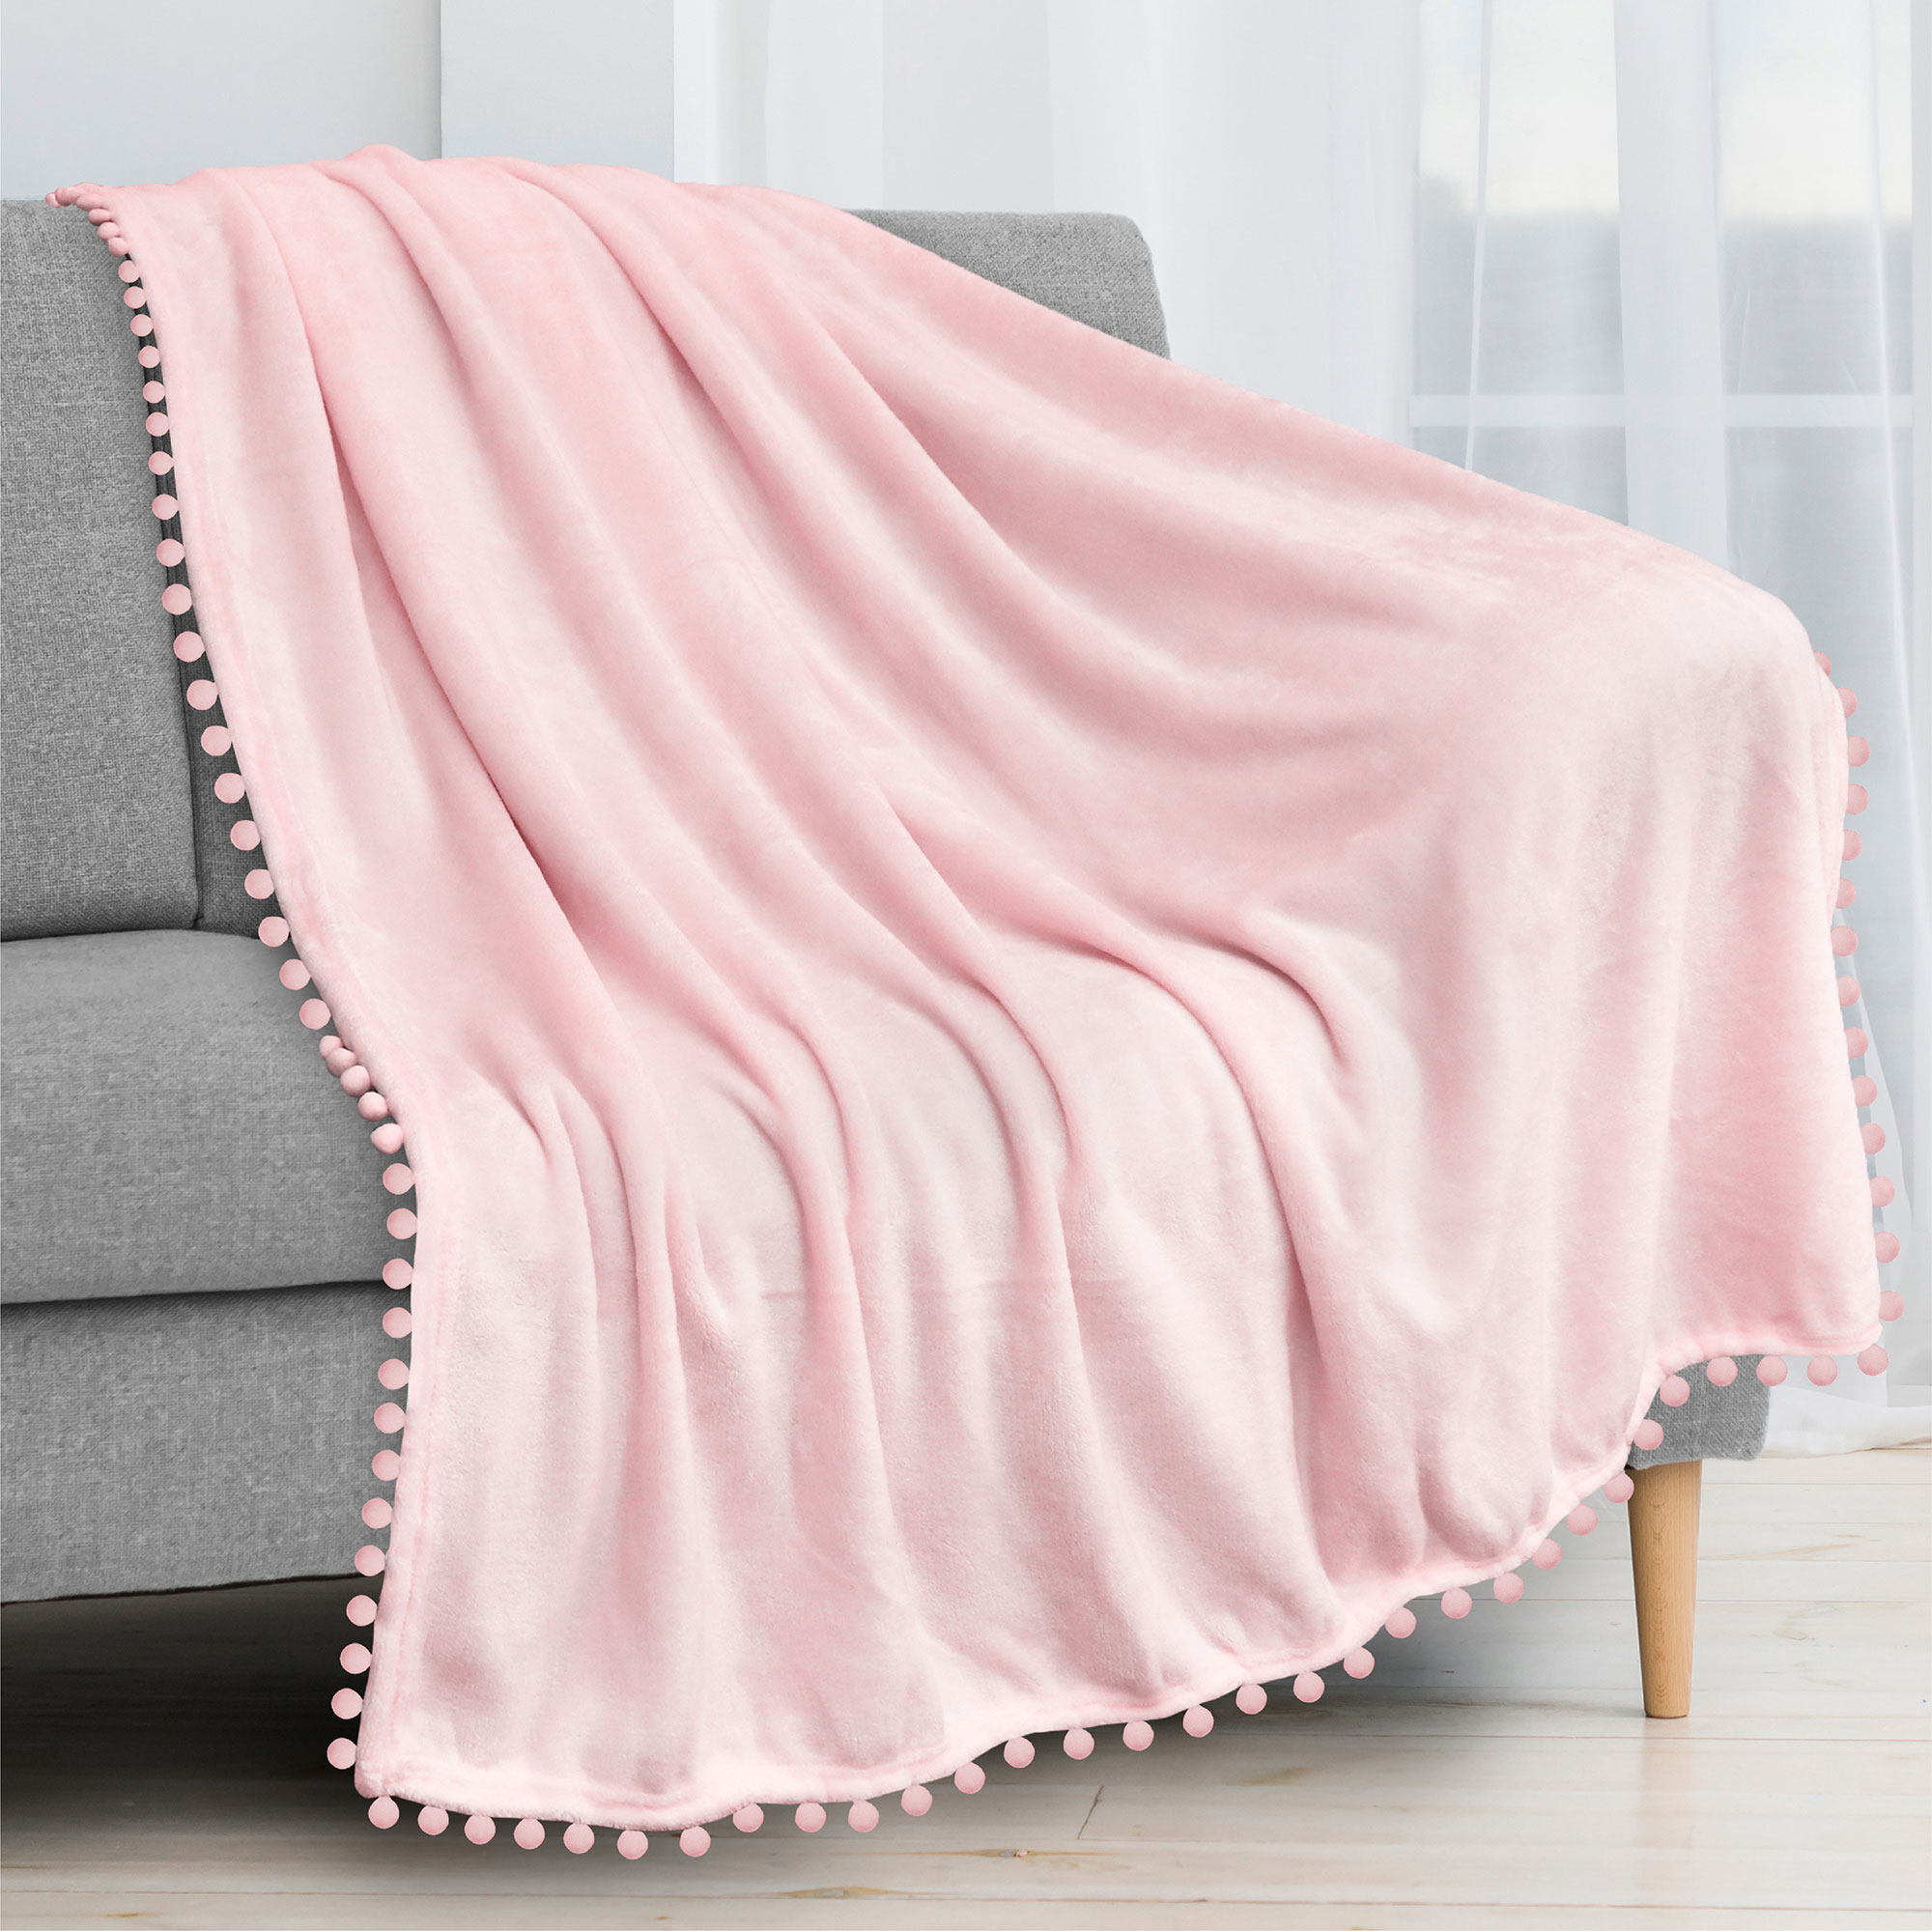 thumbnail 70 - Fleece Throw Blanket with Pom Pom Fringe Super Soft Lightweight Bed Couch Home